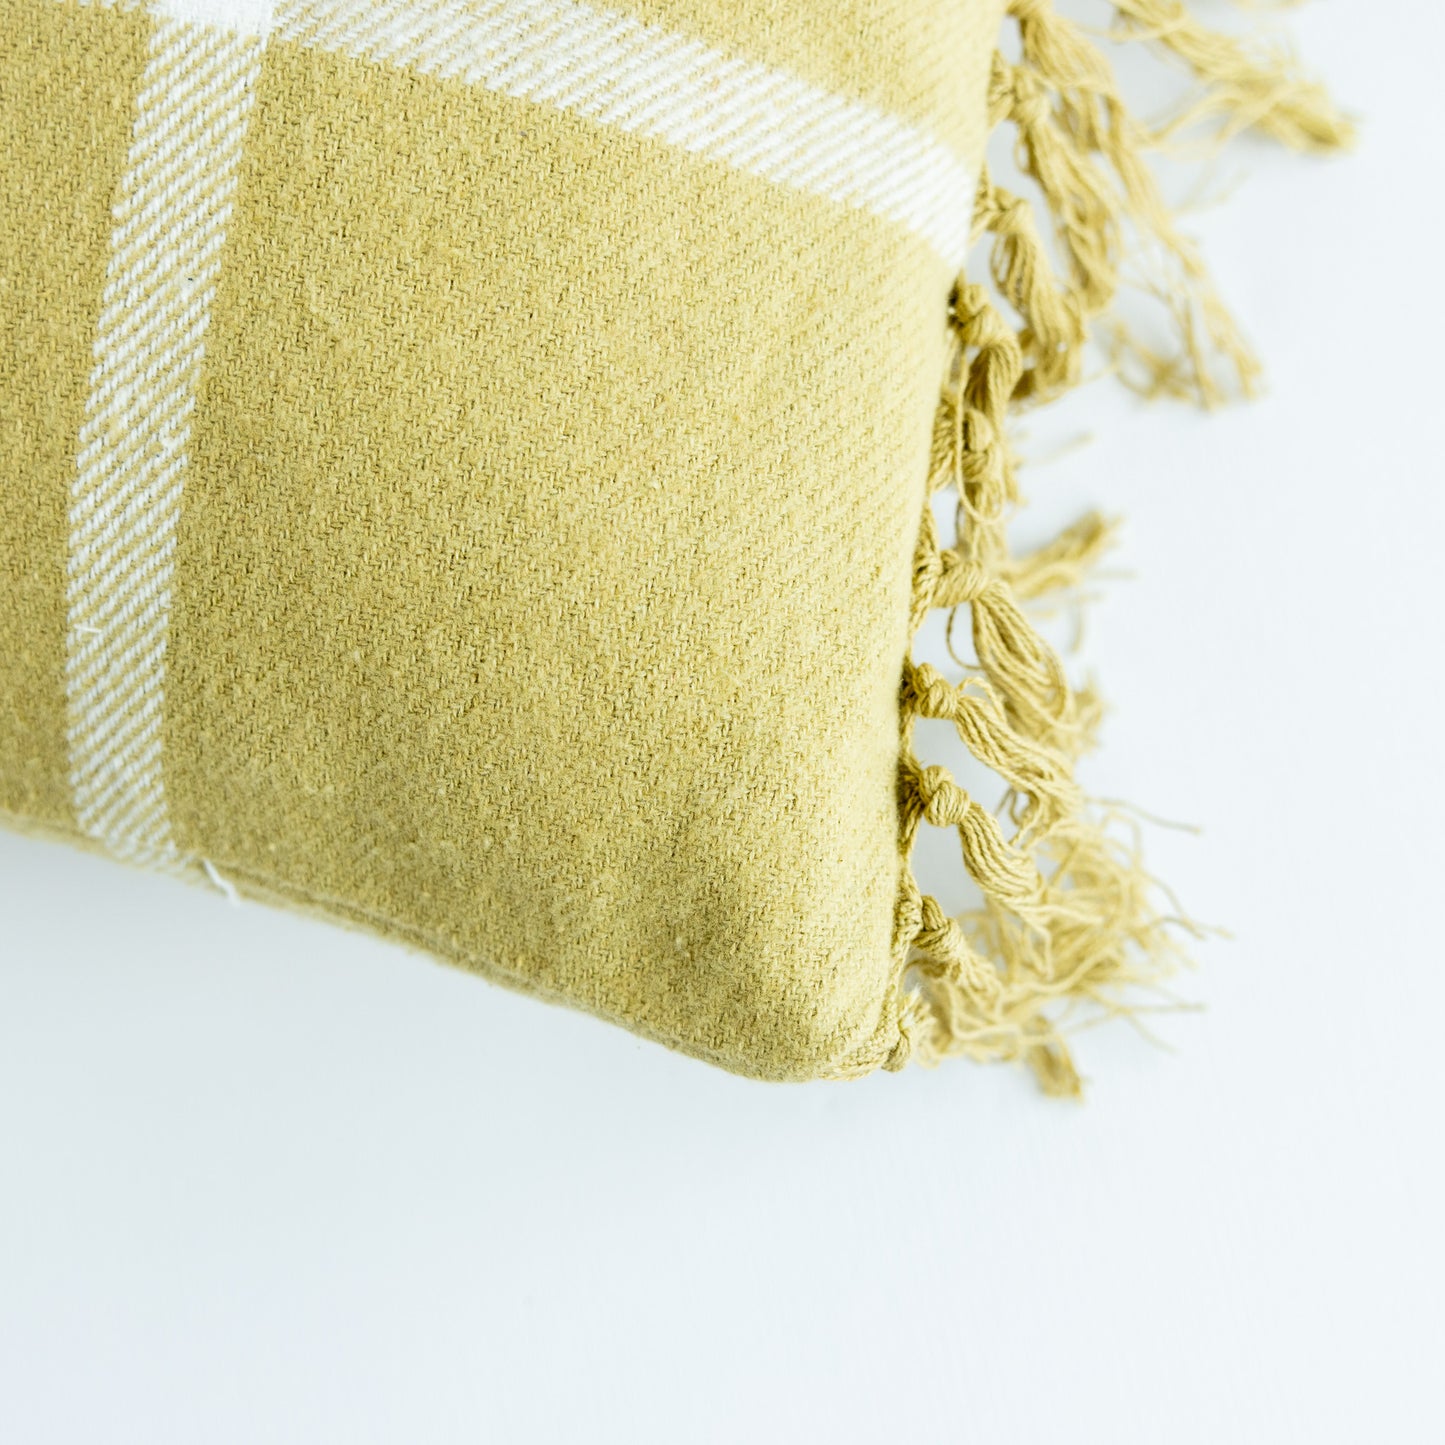 Flannel Plaid Pillow with Fringe